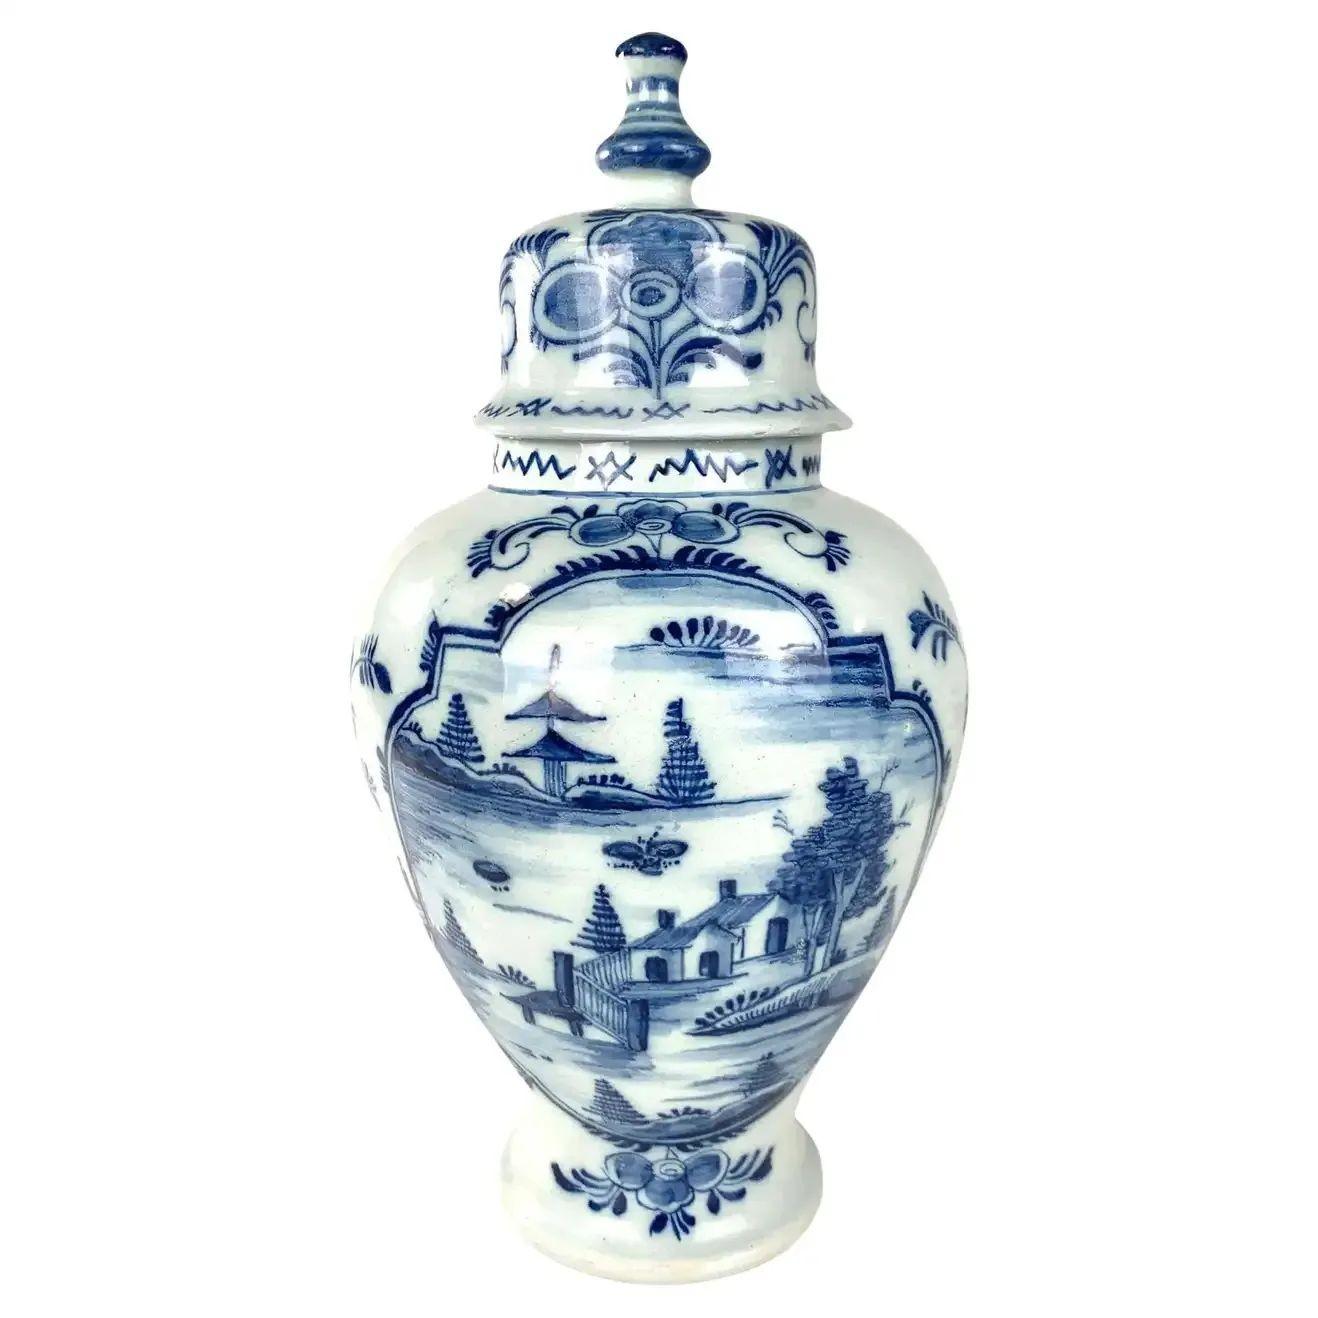  Blue and White Delft Small Vases and Jars 18th Century A Group of Seven For Sale 1